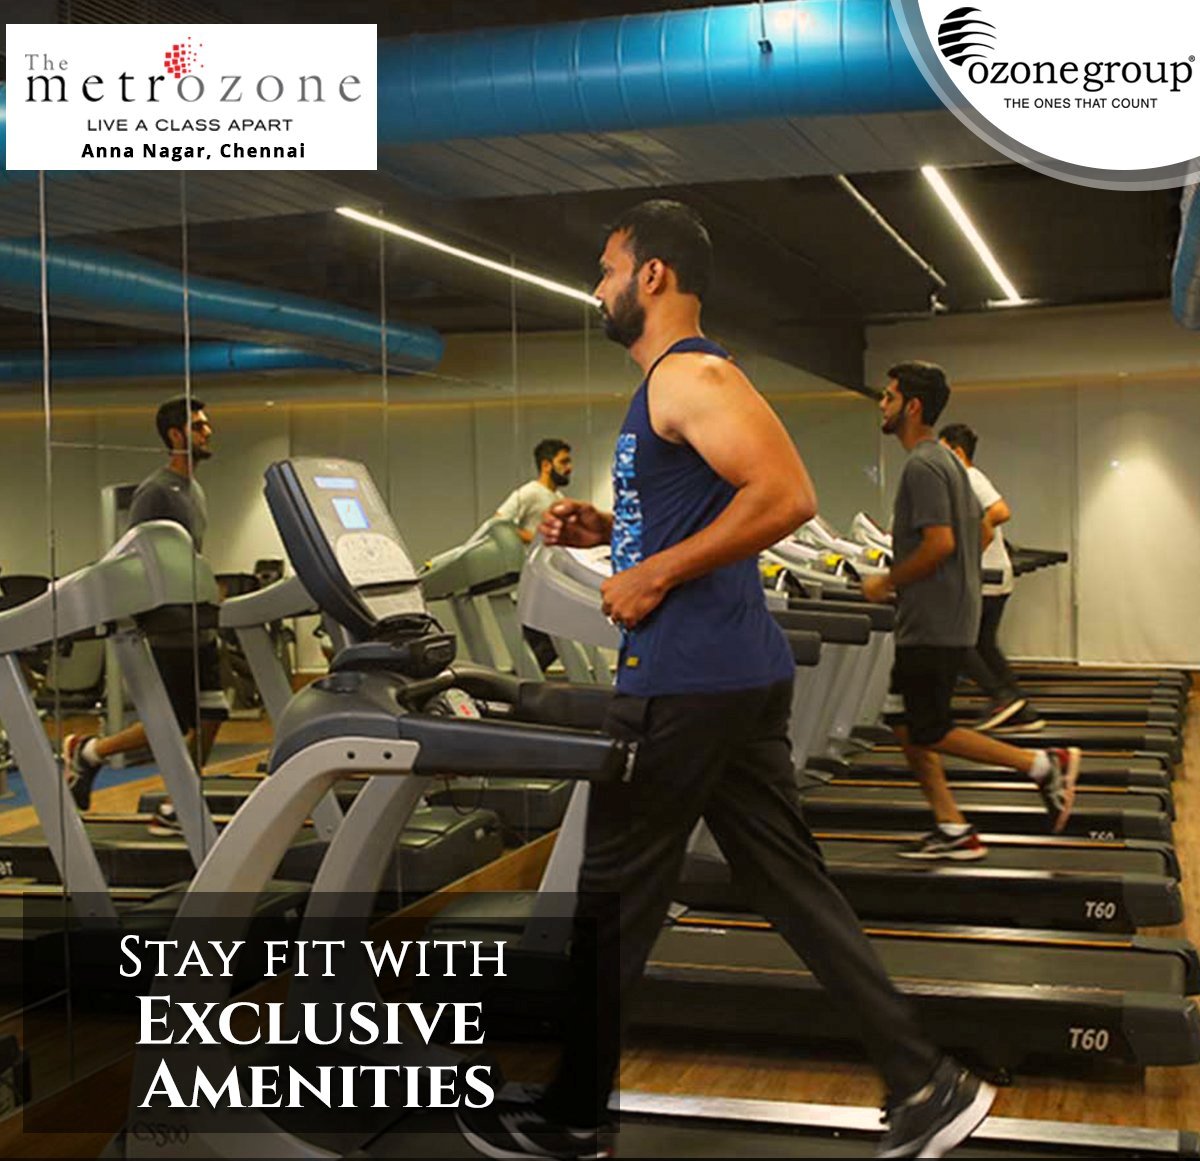 Stay fit and healthy at Ozone Metrozone with all your Health and Fitness needs taken care of Update